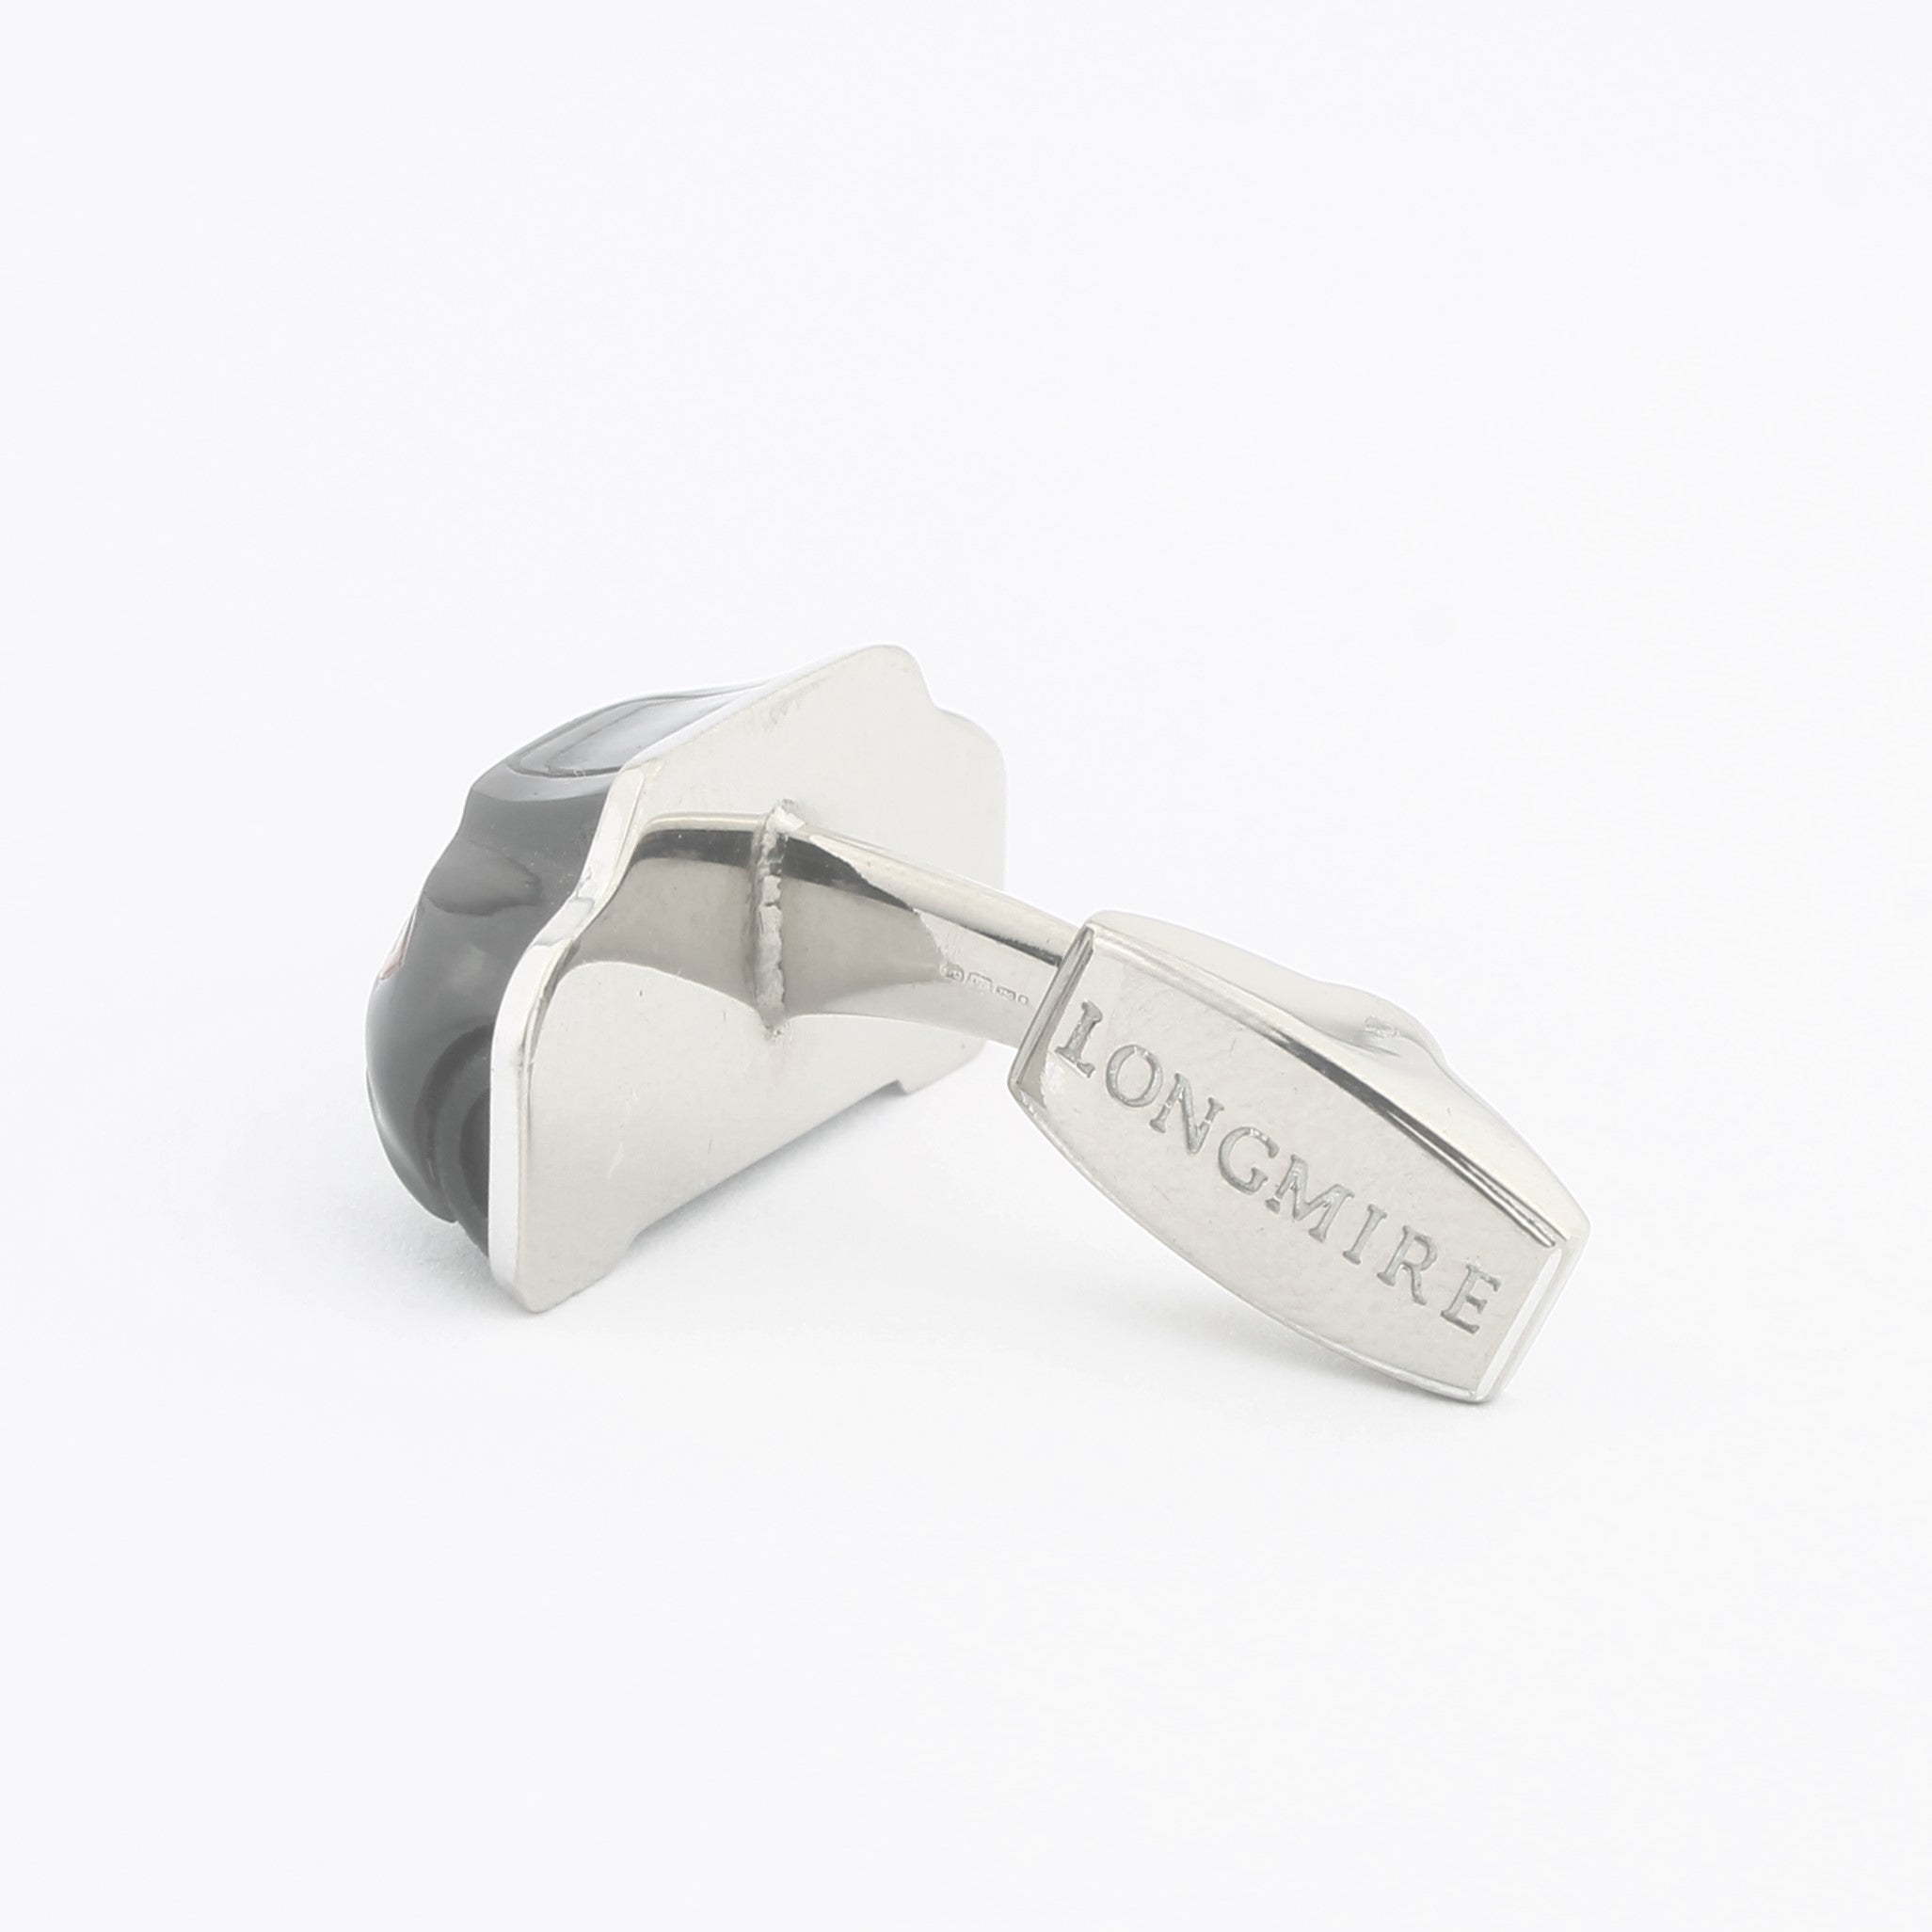 HAND CARVED 'CAR' 18ct WHITE GOLD CUFFLINKS - rear T-bar